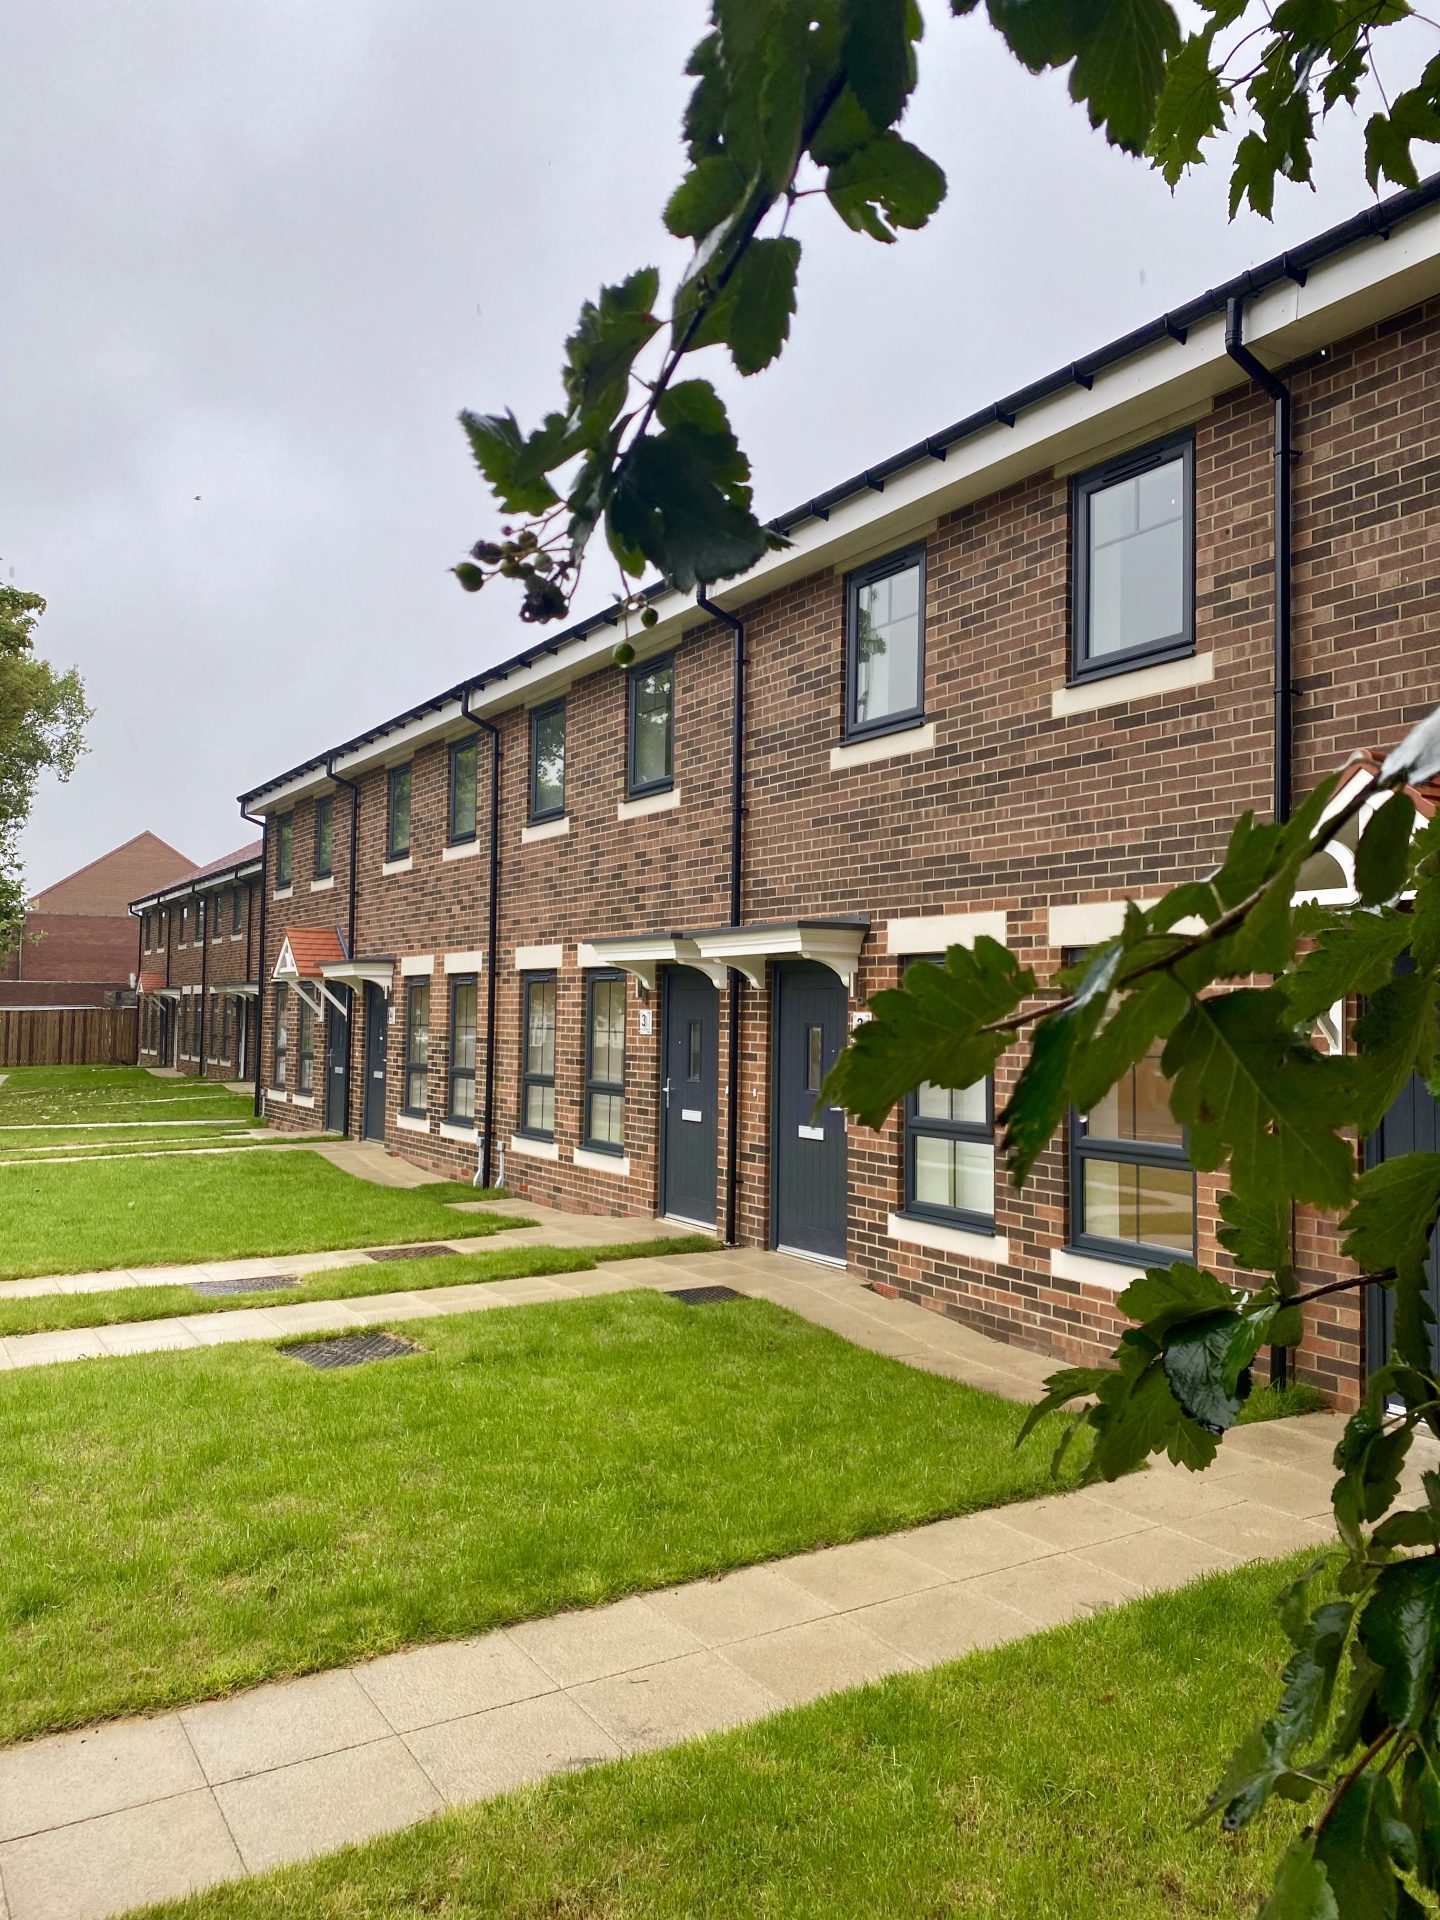 Adderstone Living To Deliver 114 Affordable Homes in Sunderland and South Shields